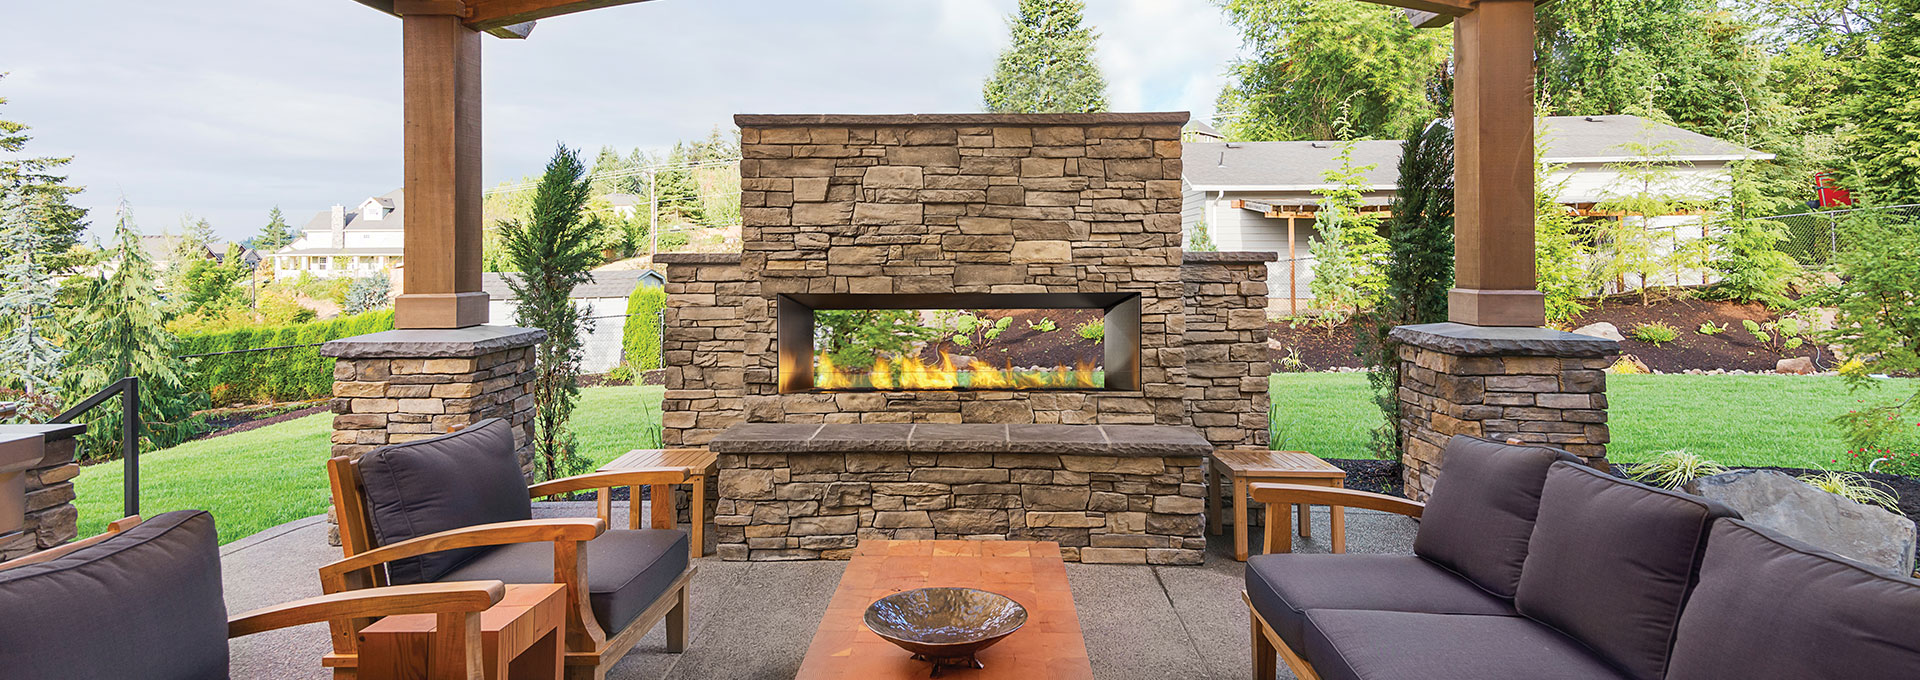 Best Outdoor Fireplaces 2018: 5 Features To Look For 